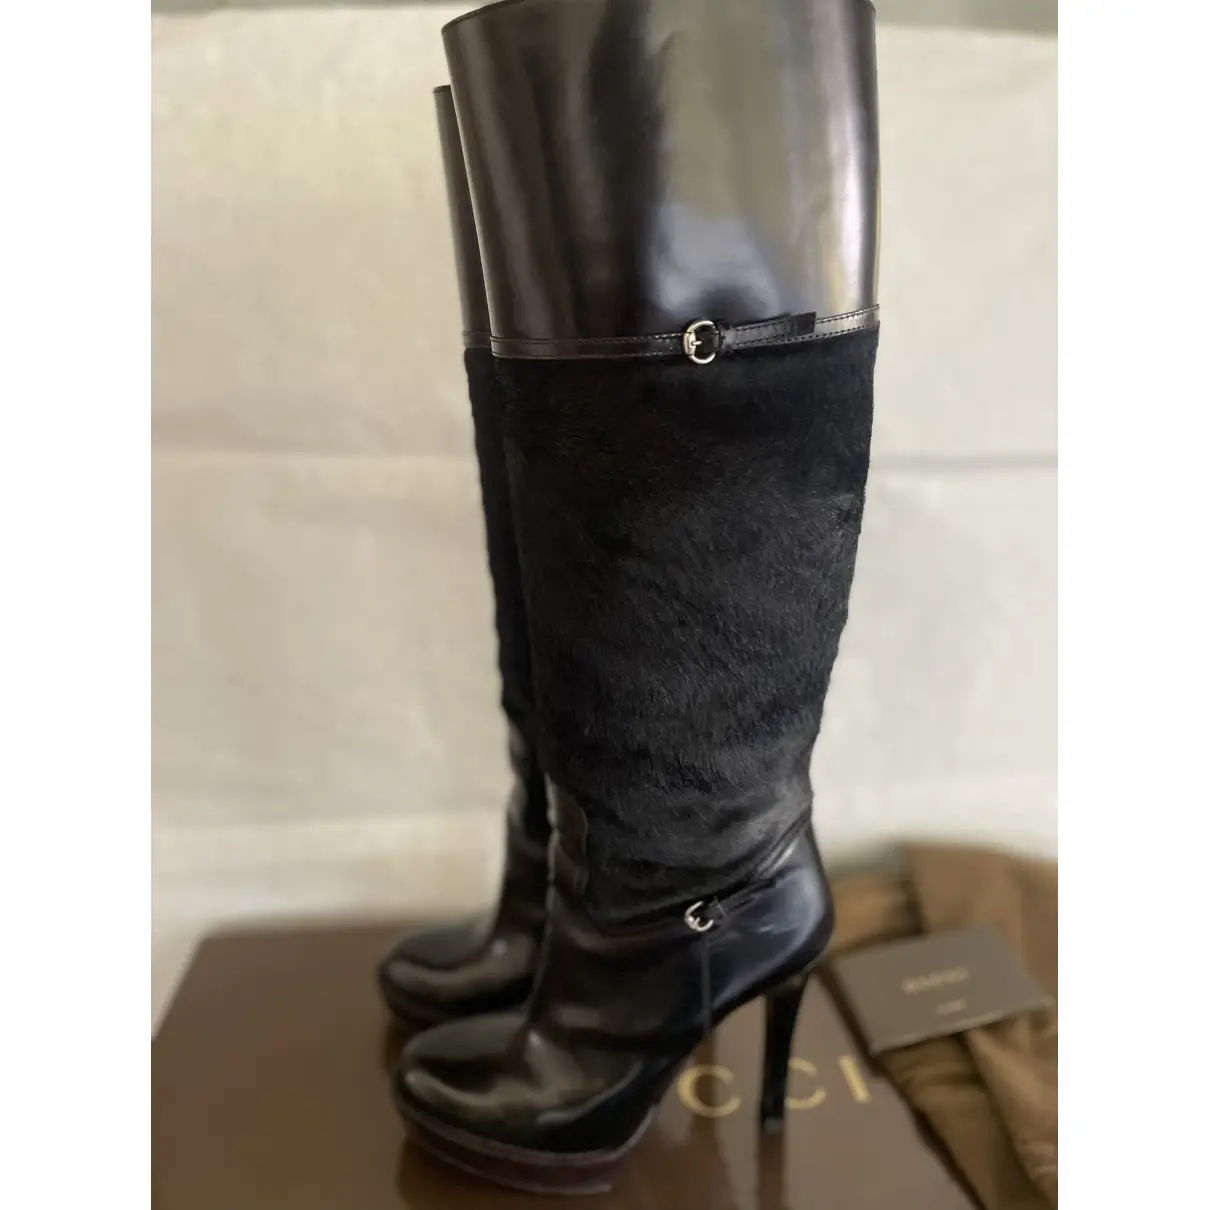 Pony-style calfskin riding boots Gucci